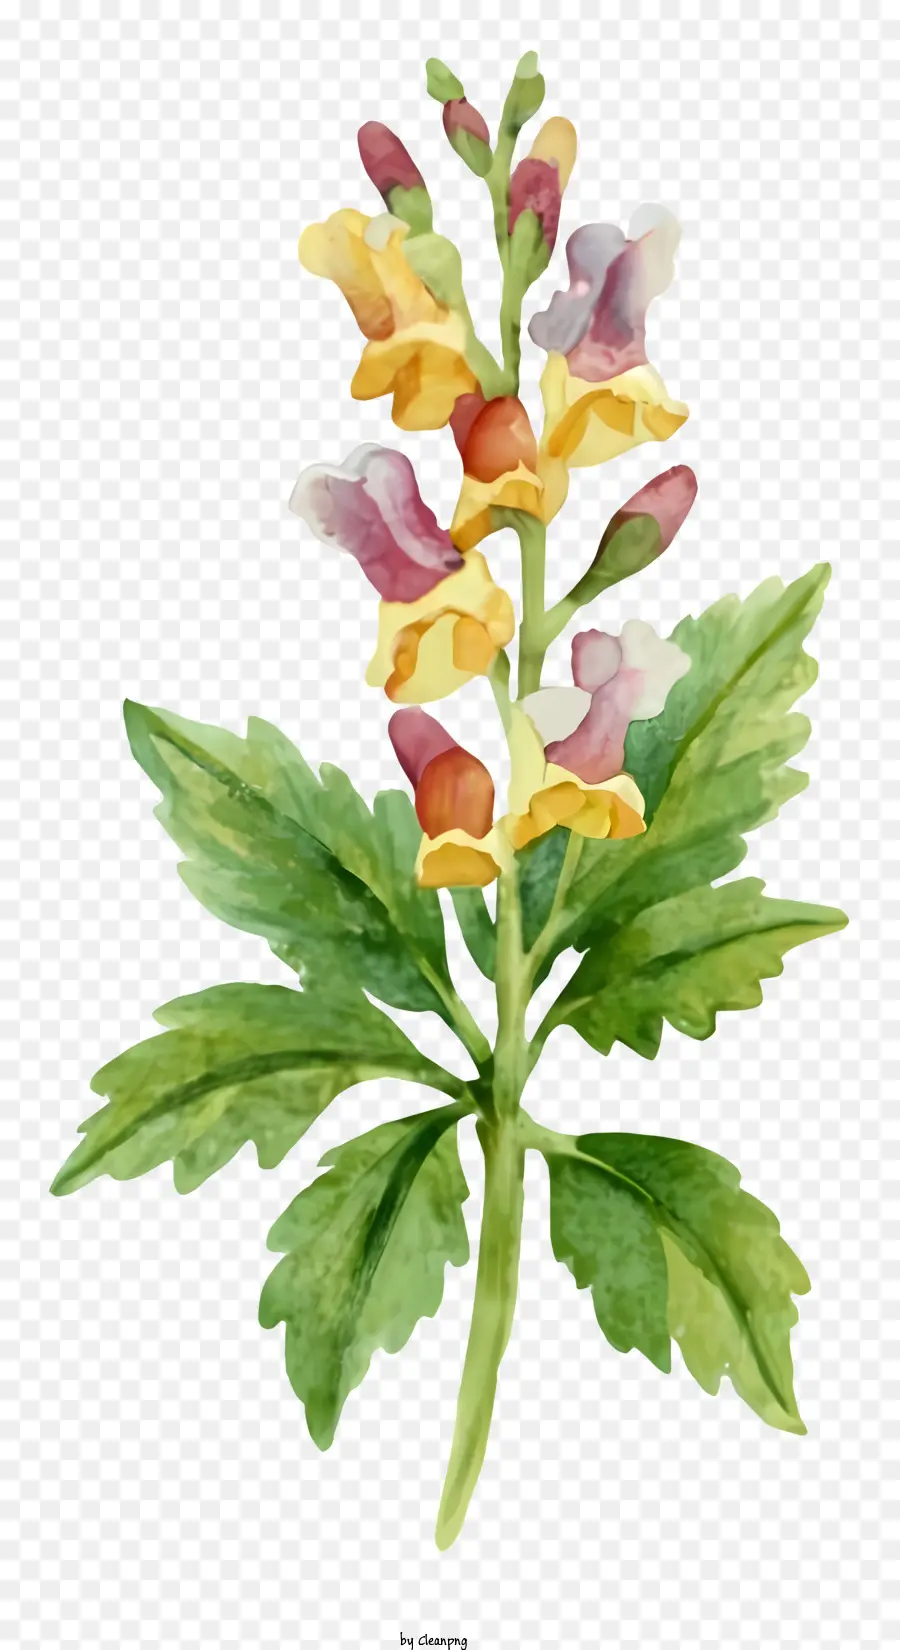 watercolor painting yellow and red flower green stem full bloom petals open